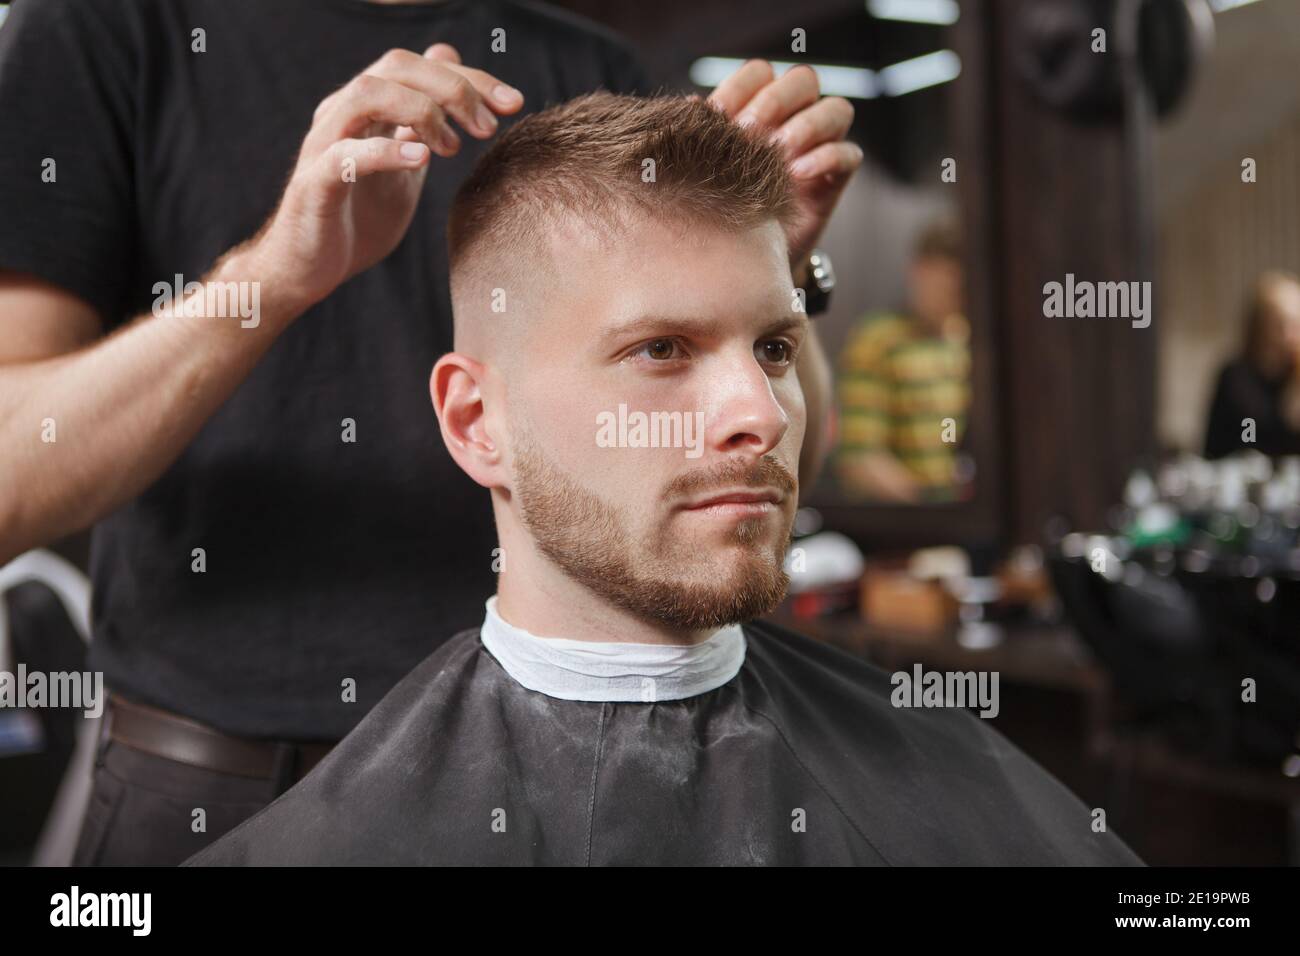 Unrecognizable barber styling hair of handsome young bearded man Stock Photo